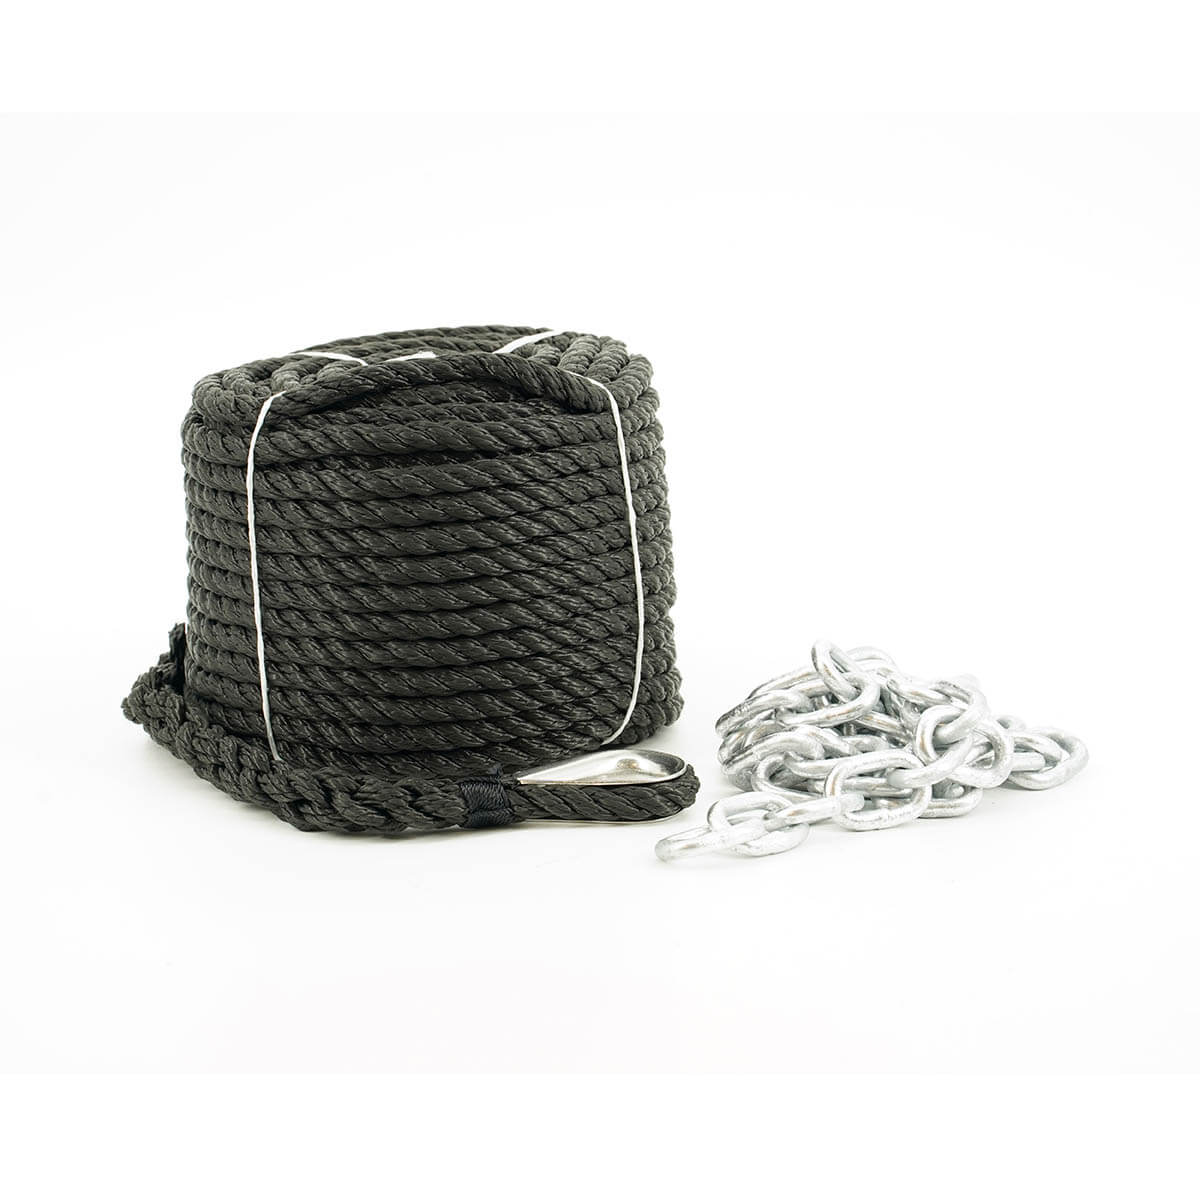 WEB-198-0024-100-Raptor-Anchor-Rope-20-M-incl-Chain-1-M-V-01